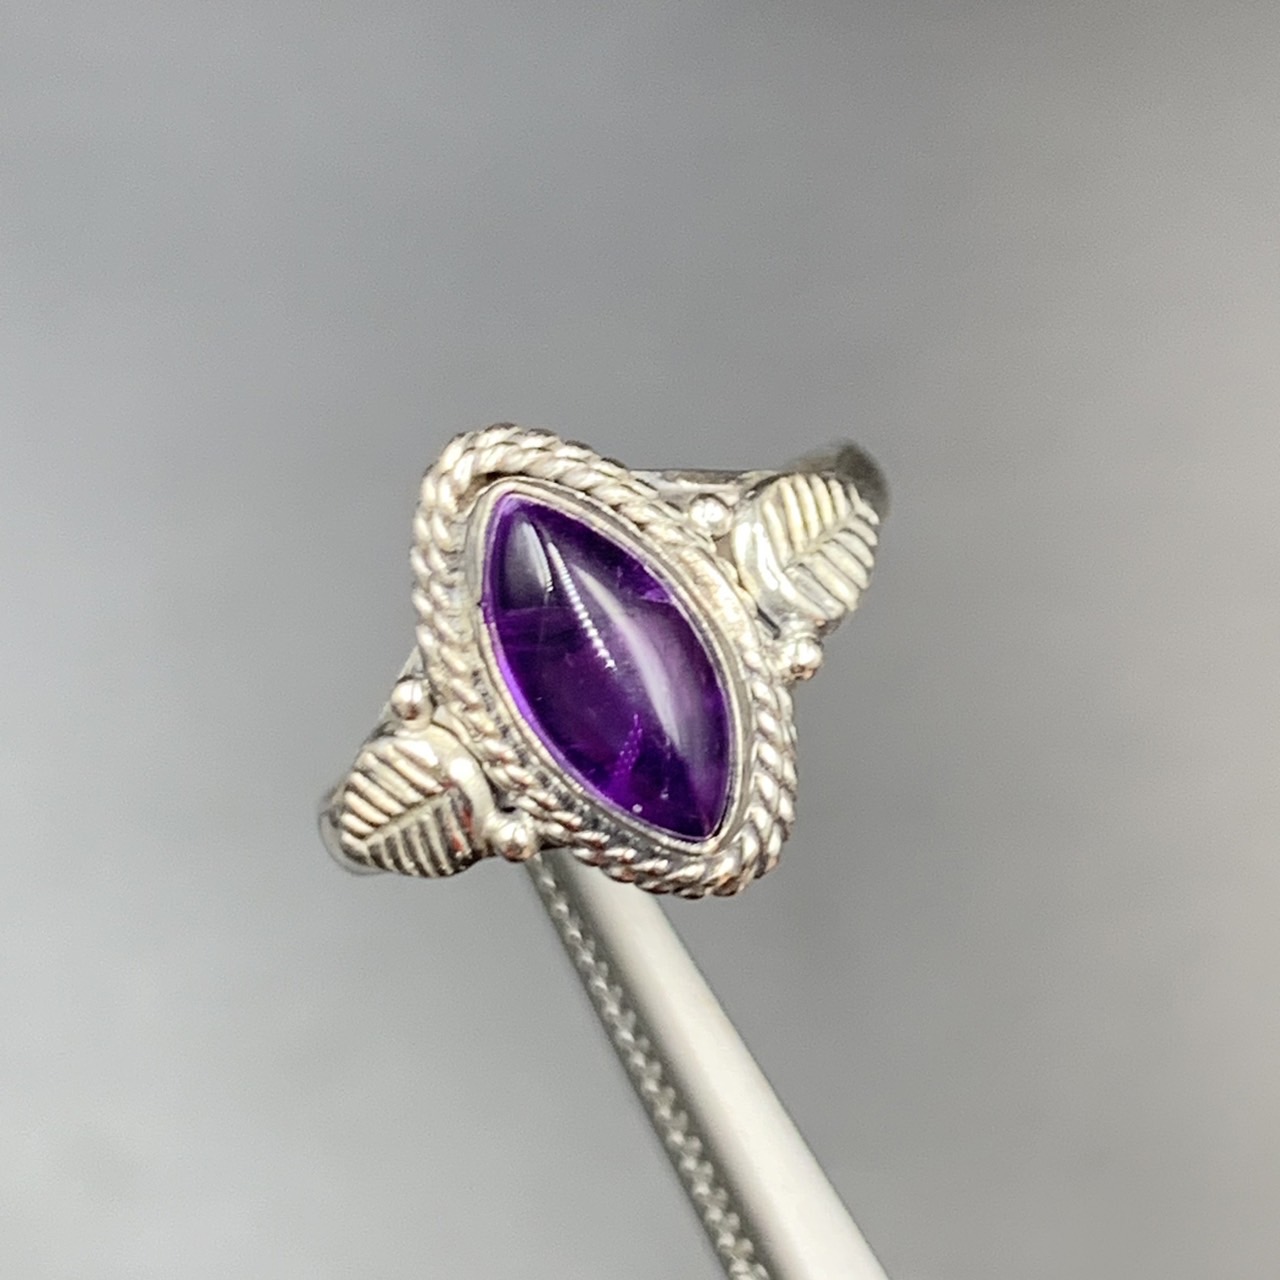 Natural Amethyst With Silver Ring - Image 4 of 4